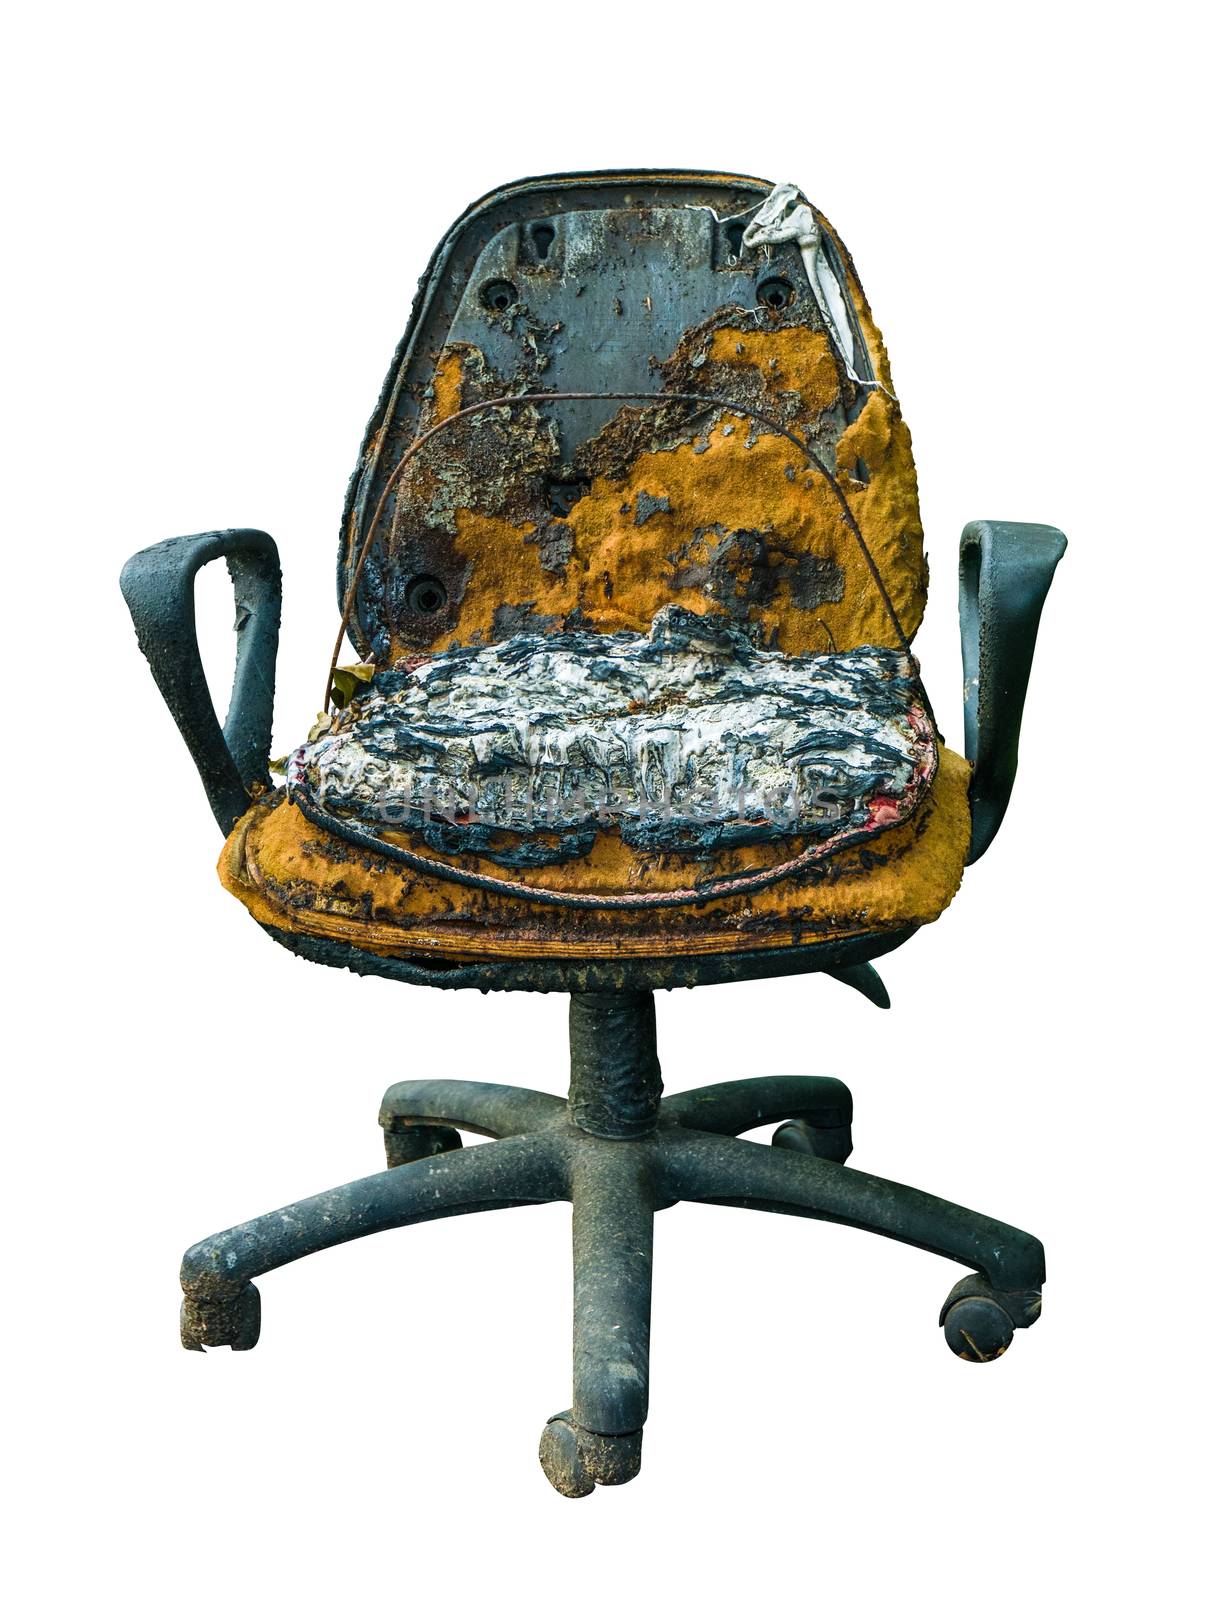 Isolated Burned Office Chair With Melted Plastic